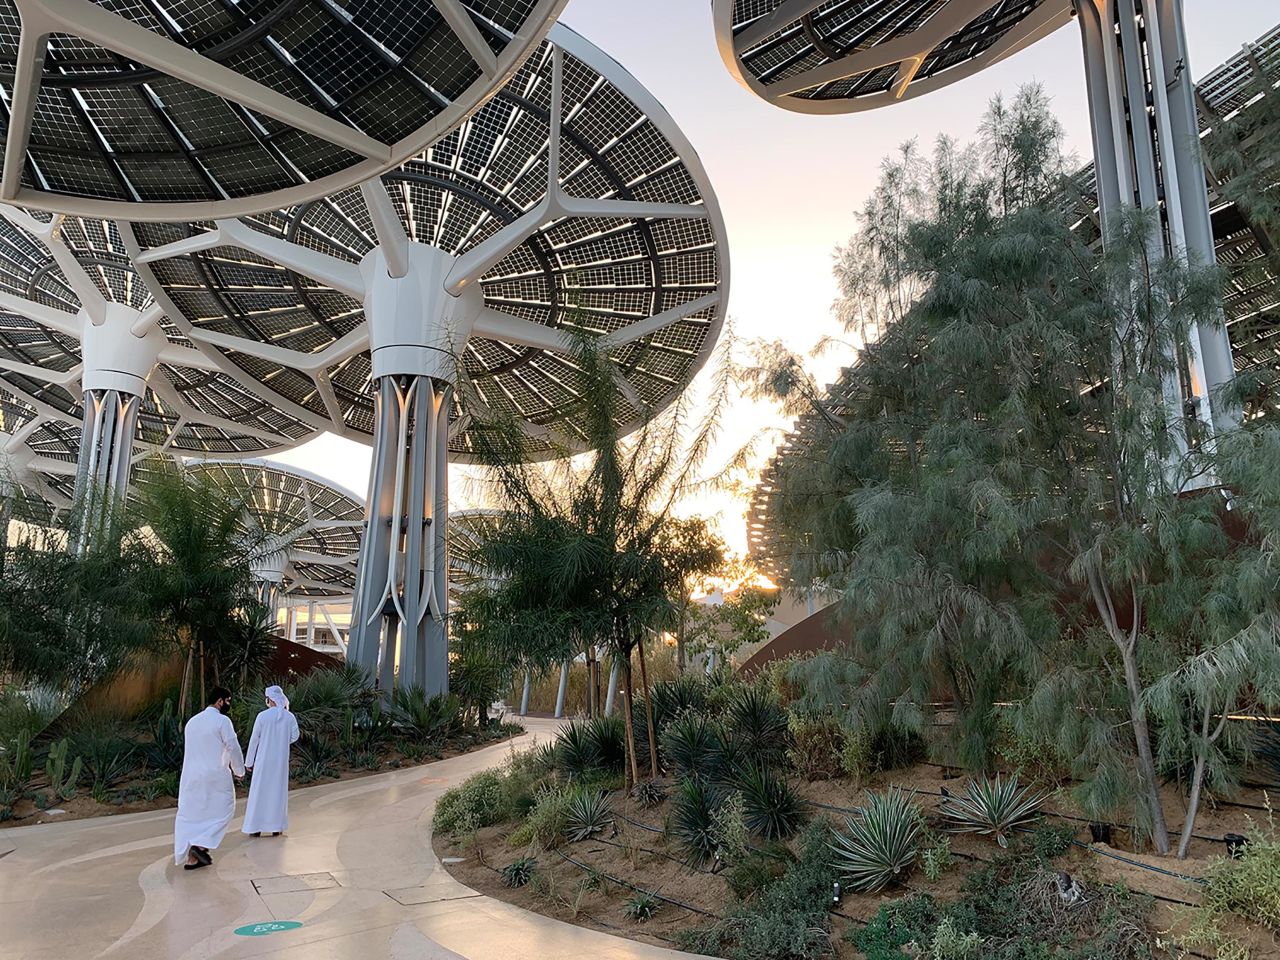 Designed by Grimshaw Architects, Terra serves as the sustainability pavilion at the delayed 2020 Dubai Expo, which is set to open in October.